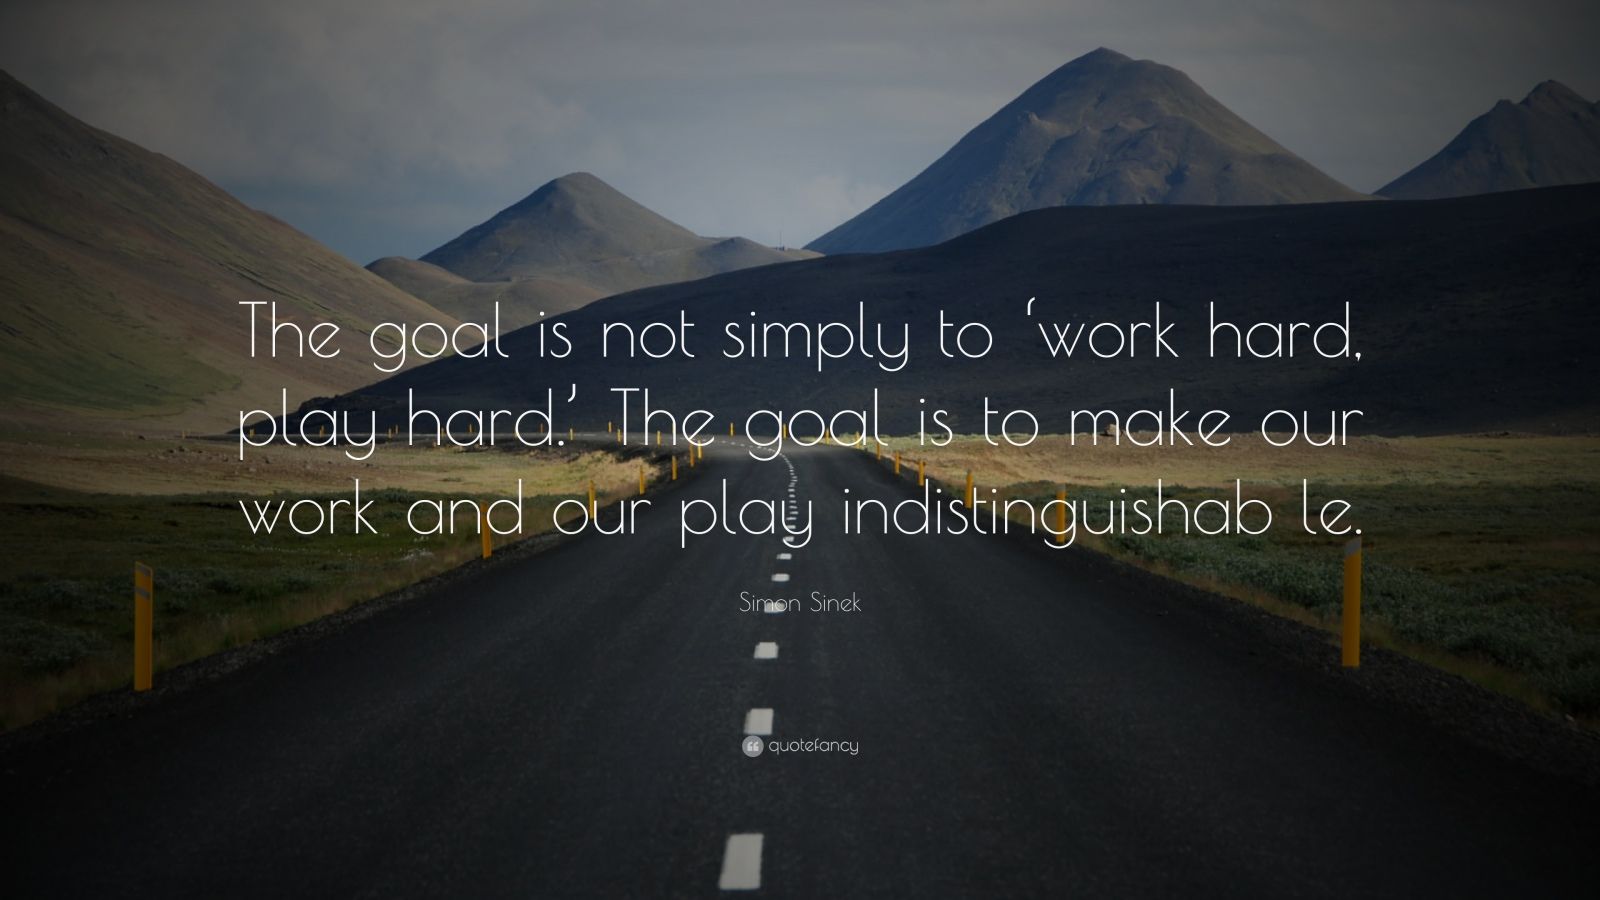 Simon Sinek Quote: “The goal is not simply to ‘work hard, play hard